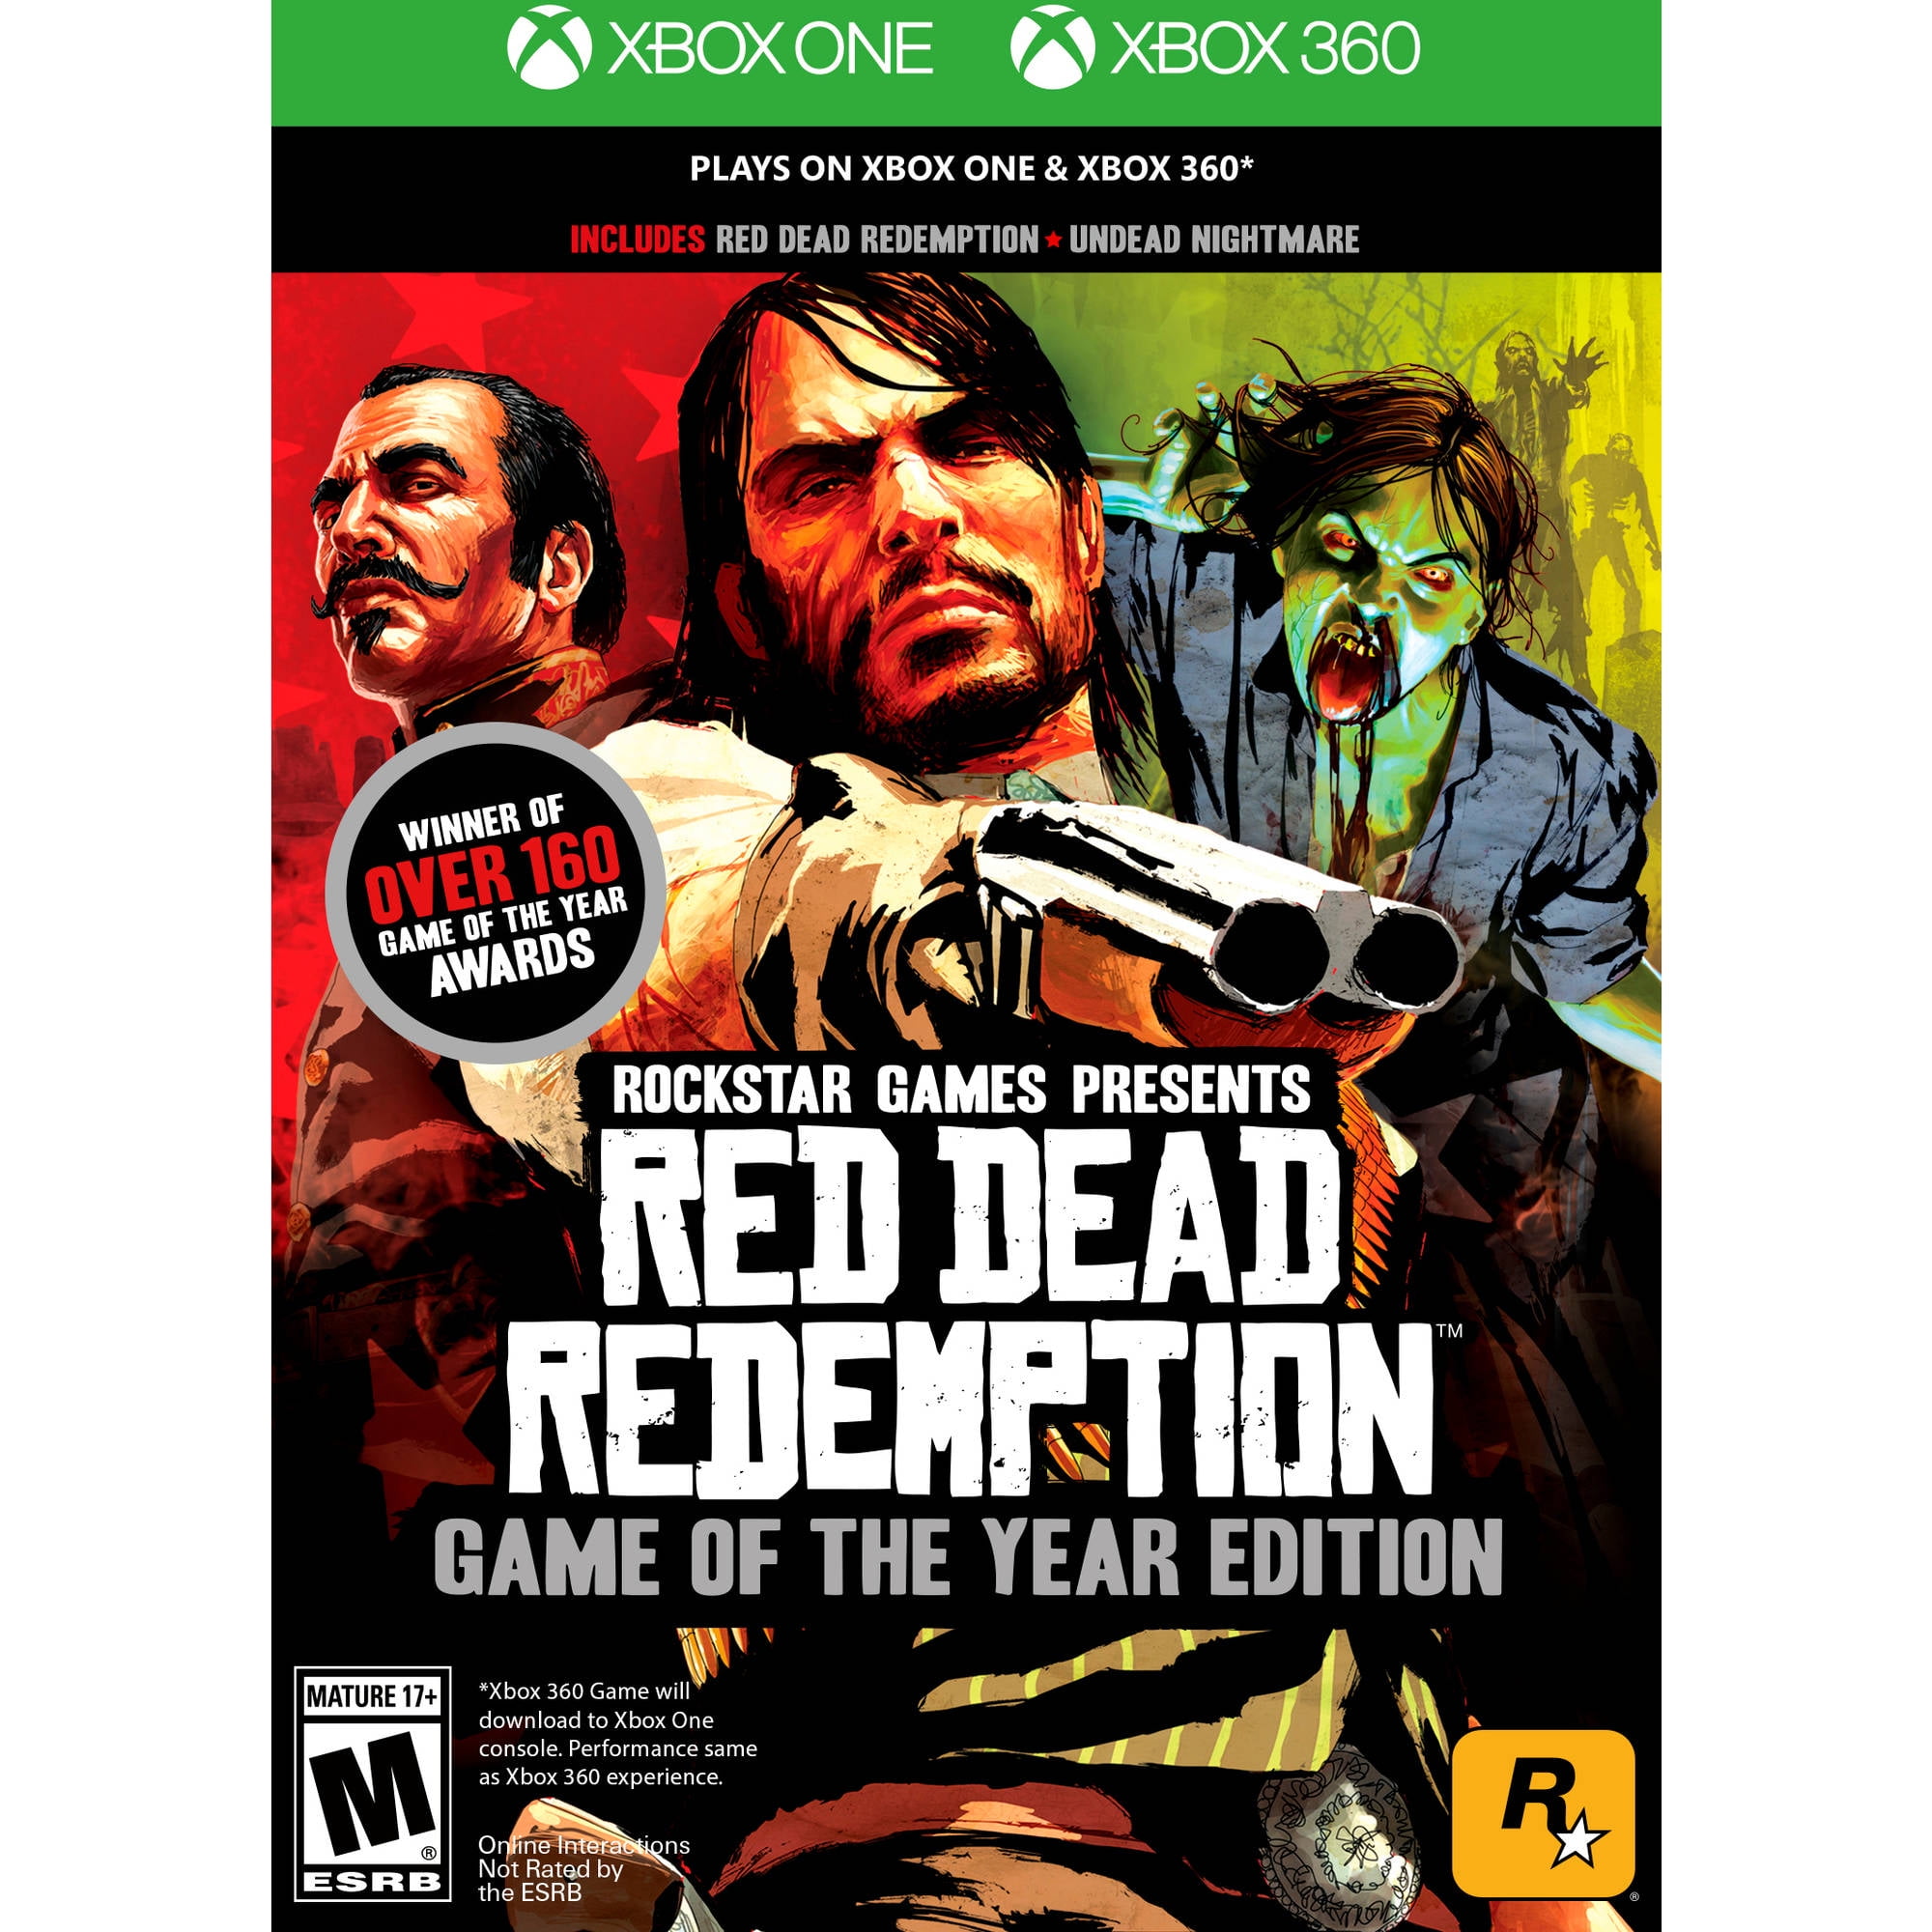 Buy Red Dead Redemption 2 - Special Edition (Xbox One) game Online